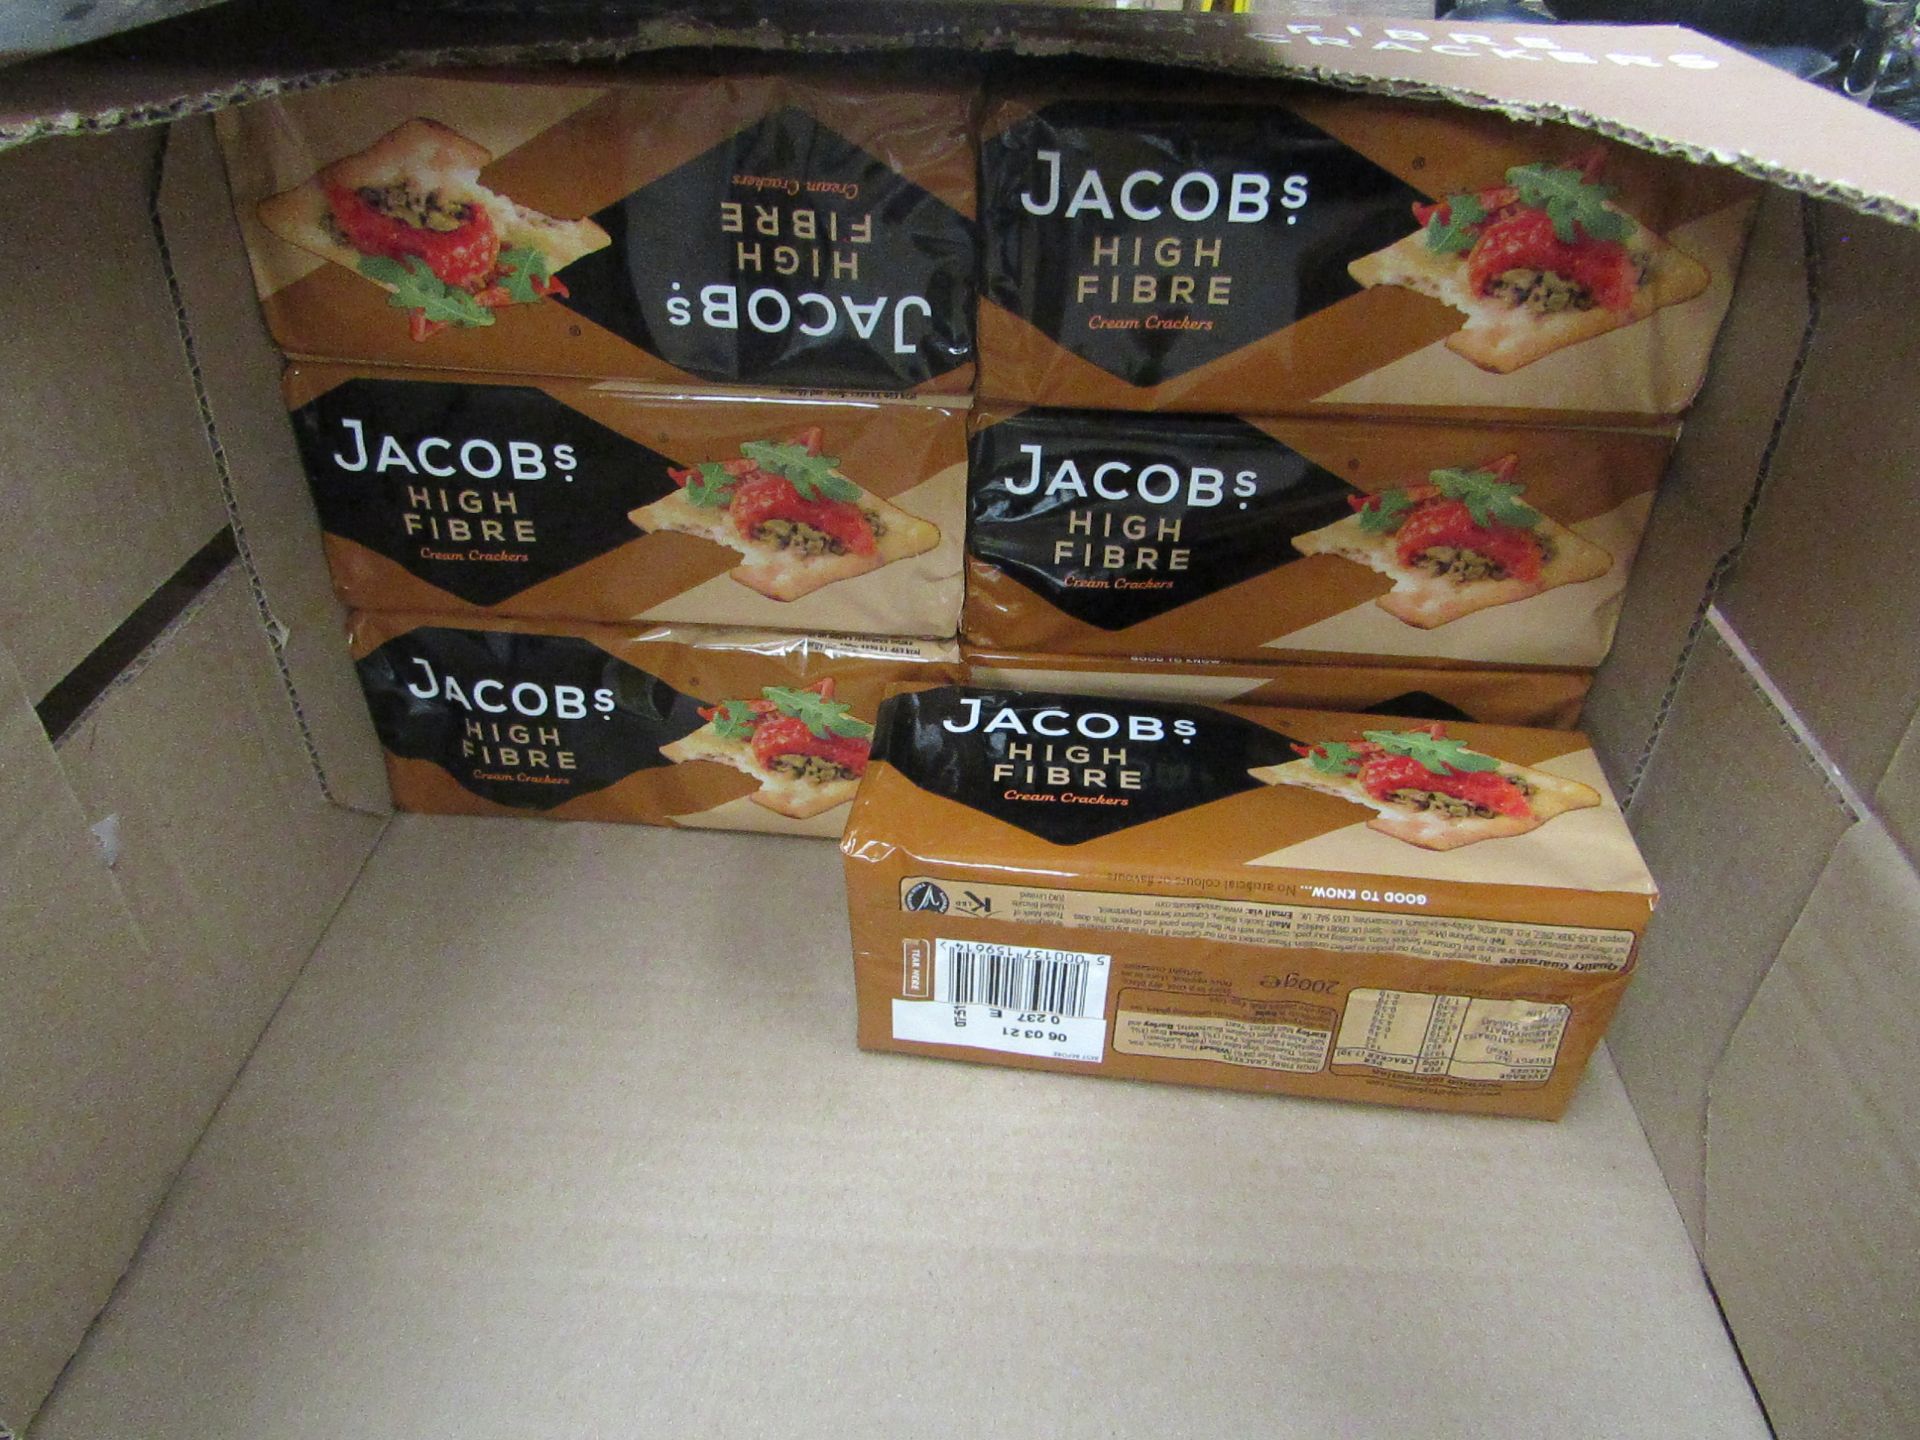 7x Jacobs - High Fibre Cream Crackers 200g Packs - BBD 06/03/21 - Box Opened, Packs Sealed.